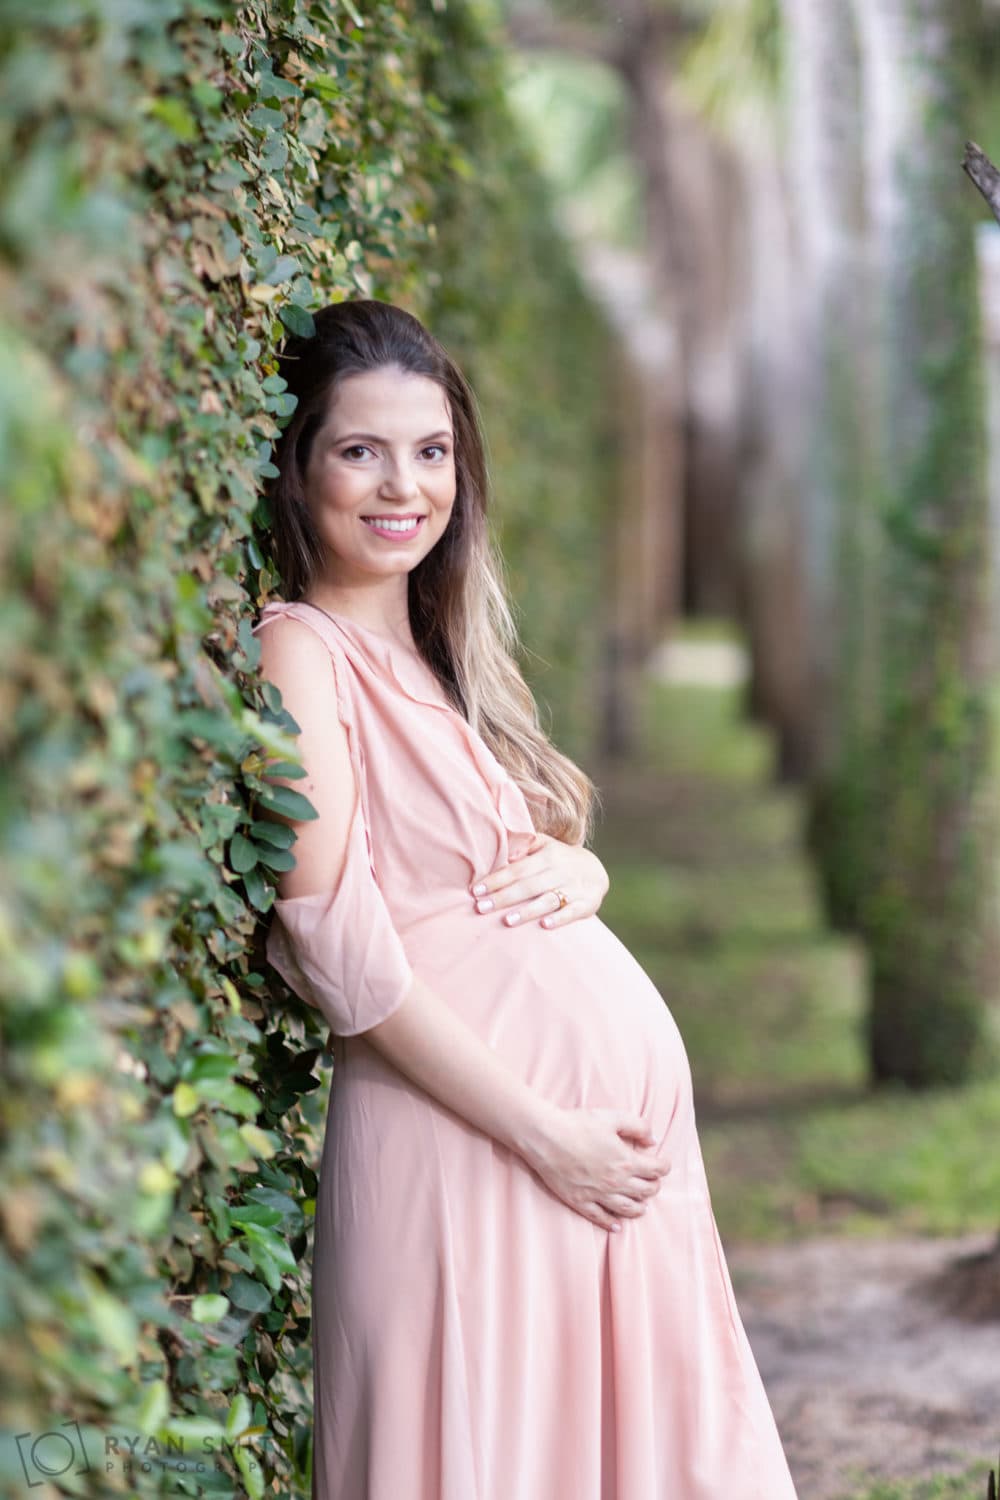 Maternity portraits leaning against the ivy wall - Atalaya Castle